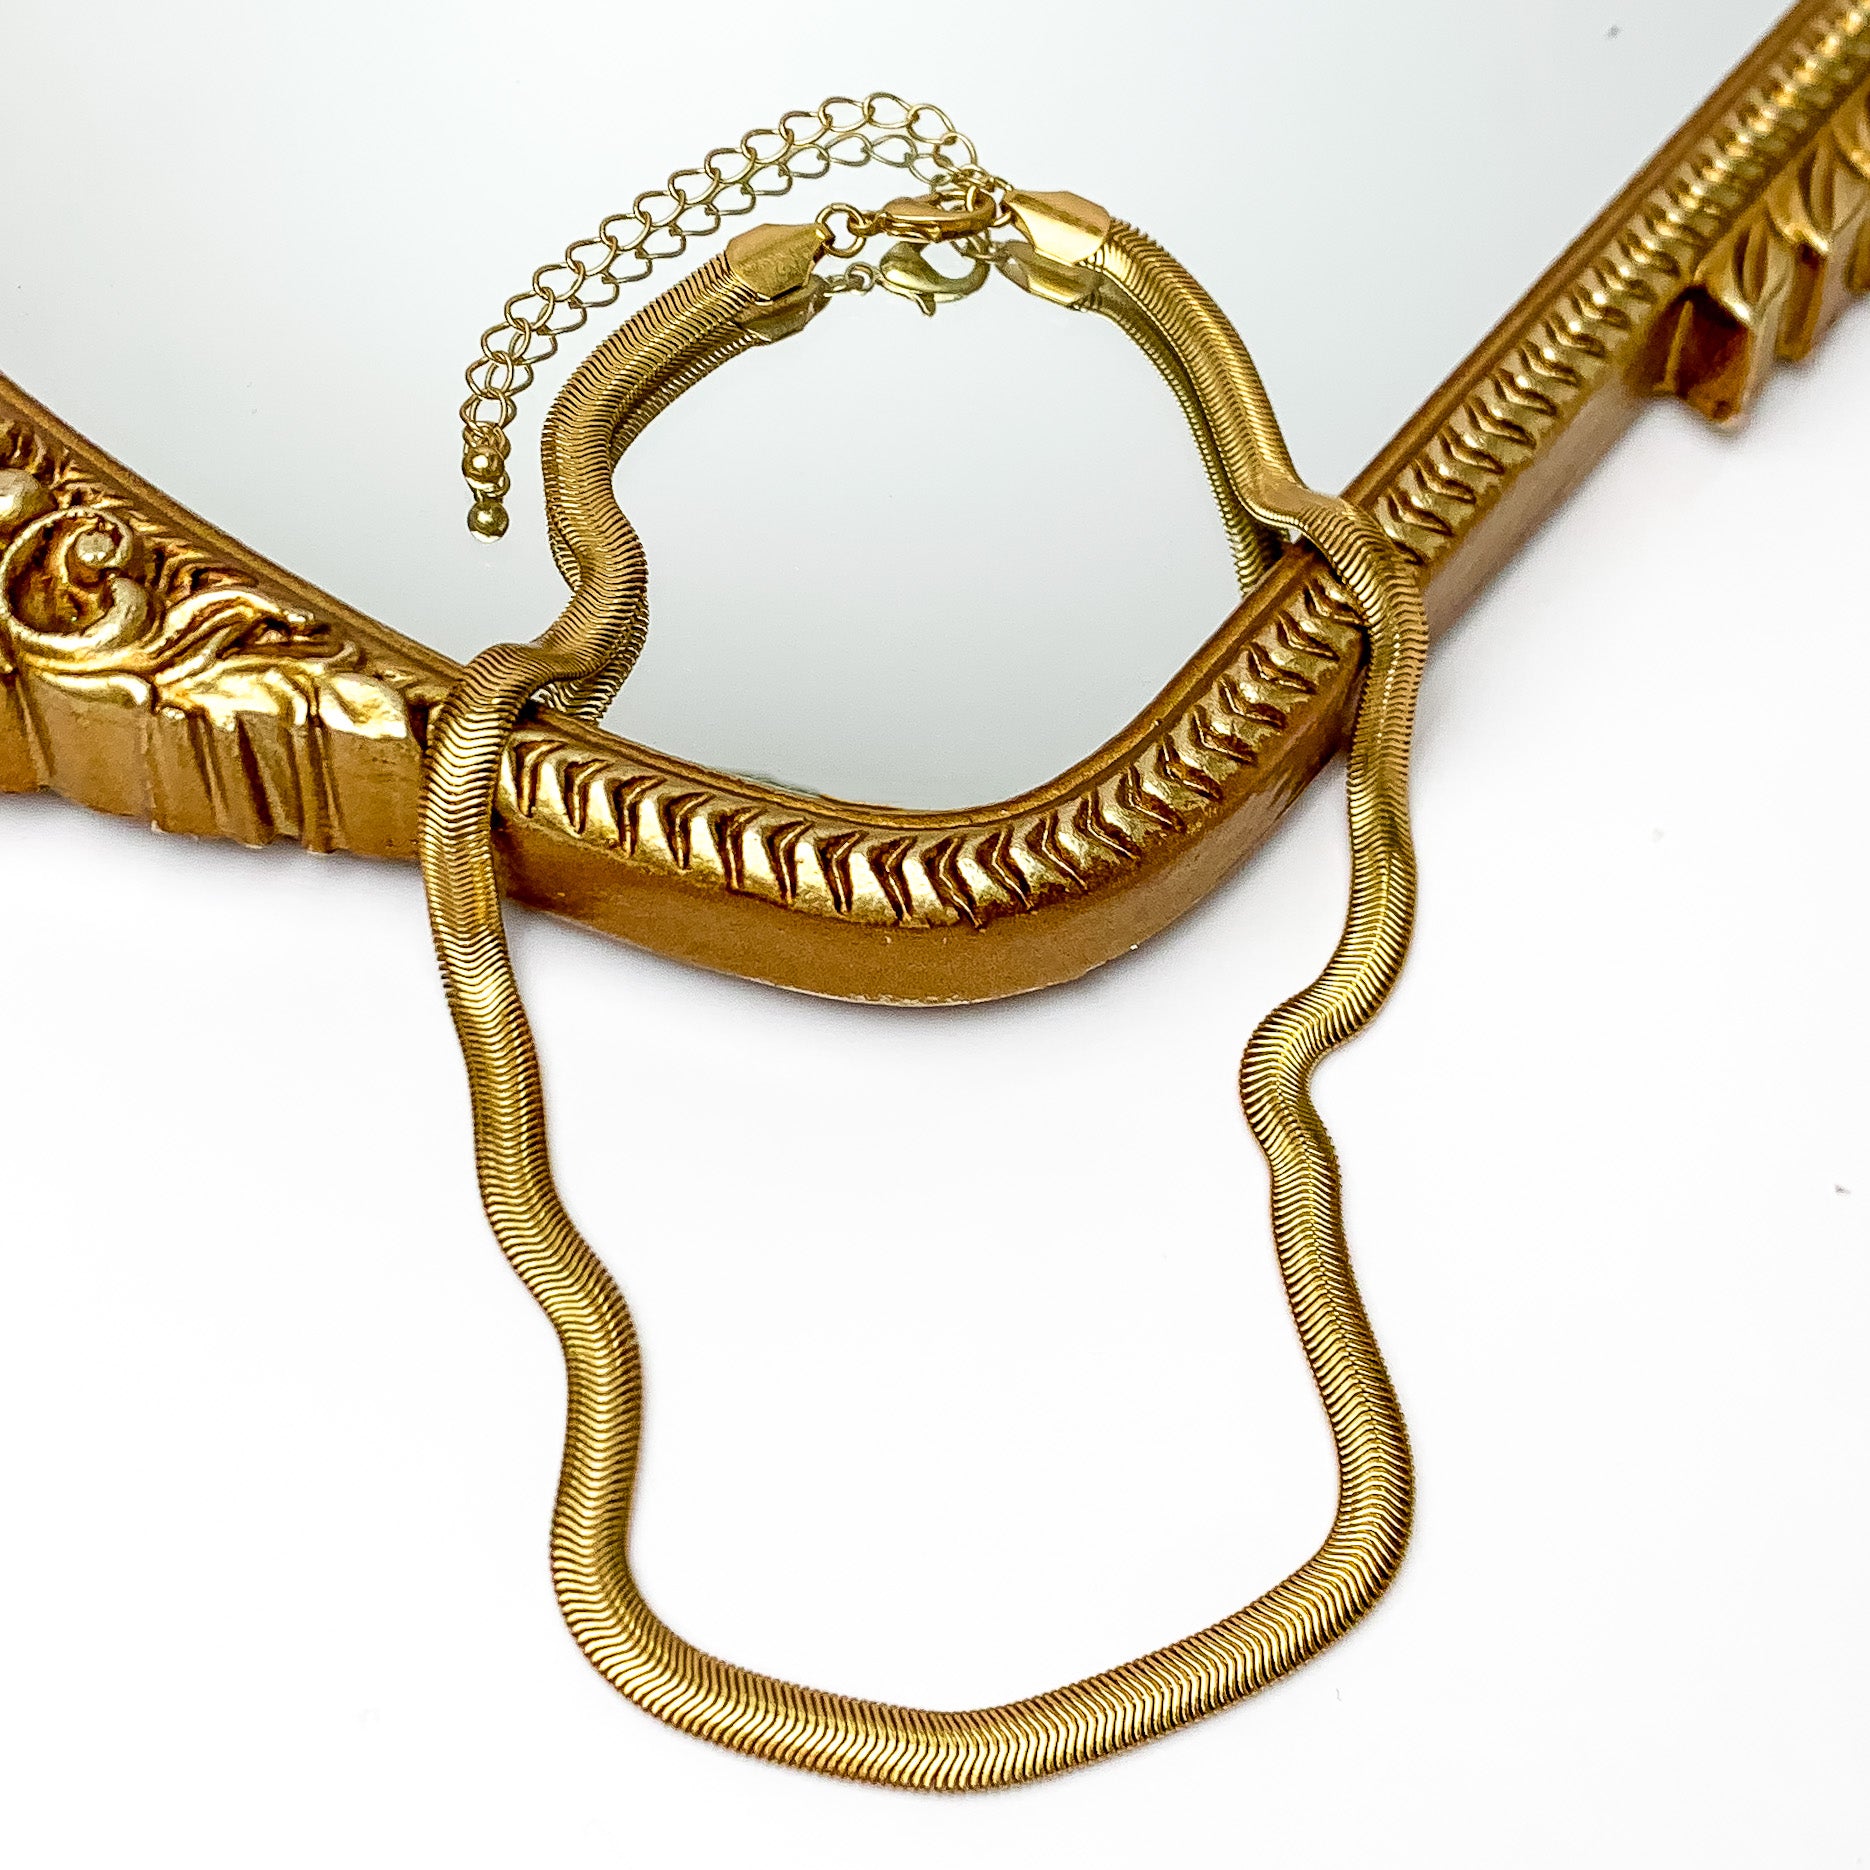 Gold tone classic chain necklace. Pictured on a white background with a gold frame through the middle.